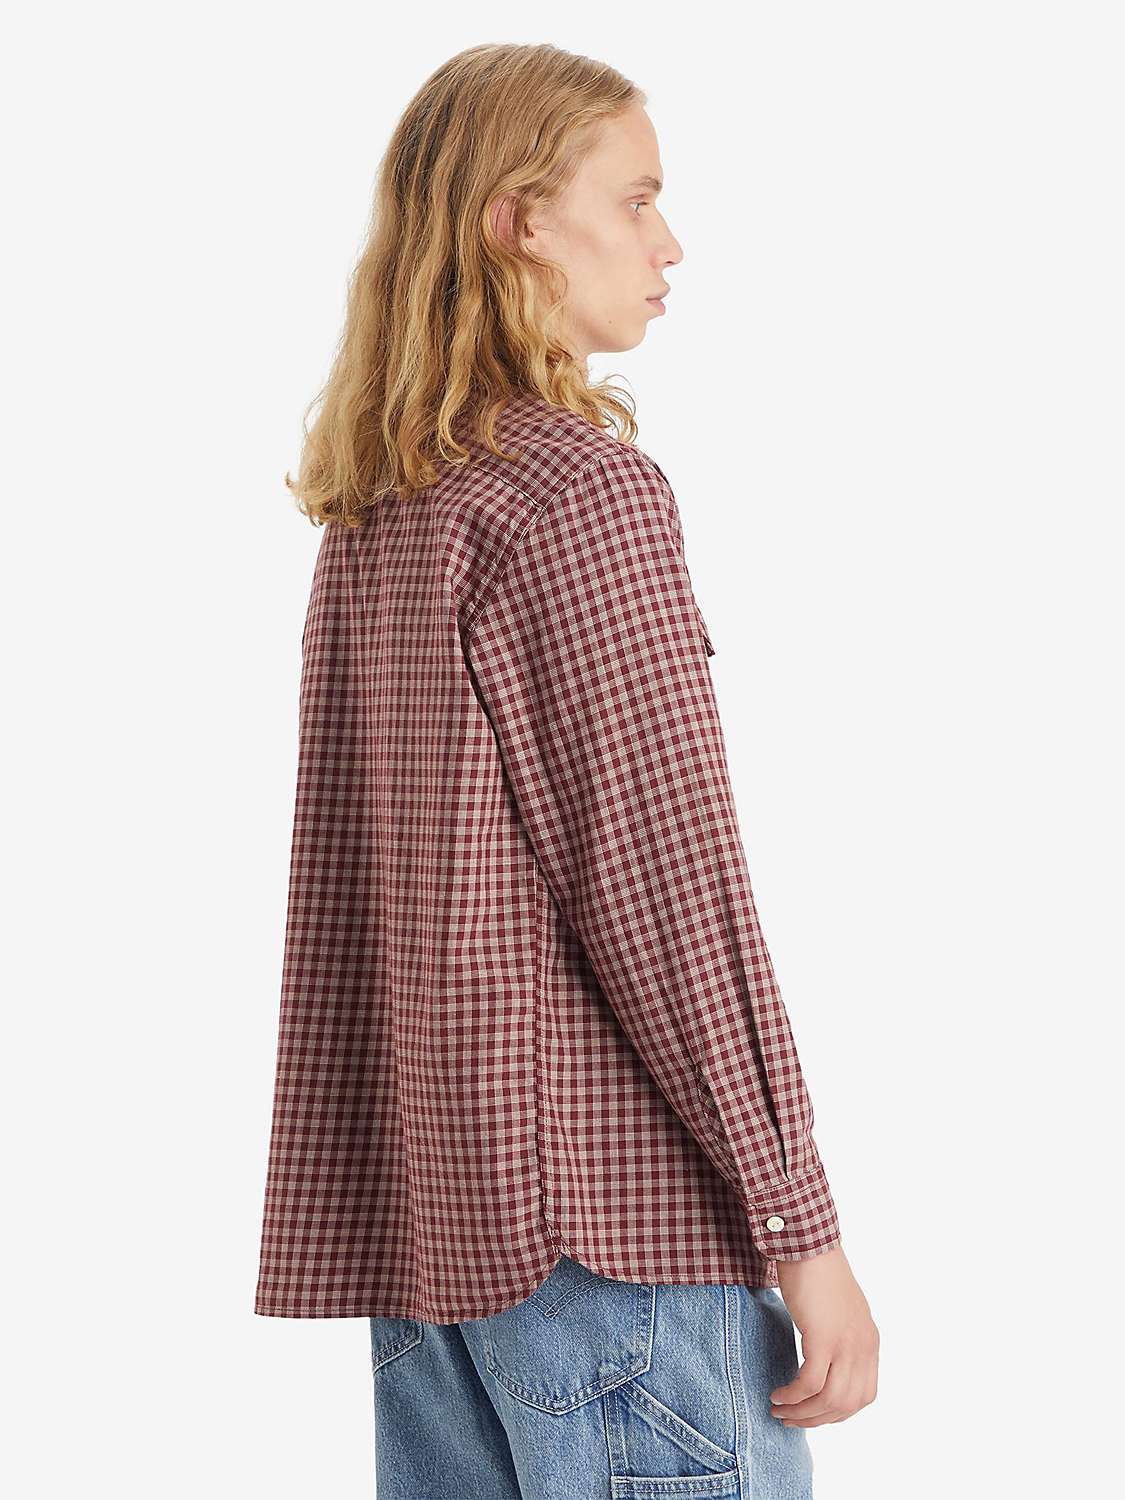 Buy Levi's Classic Checked Worker Shirt, Red/Multi Online at johnlewis.com